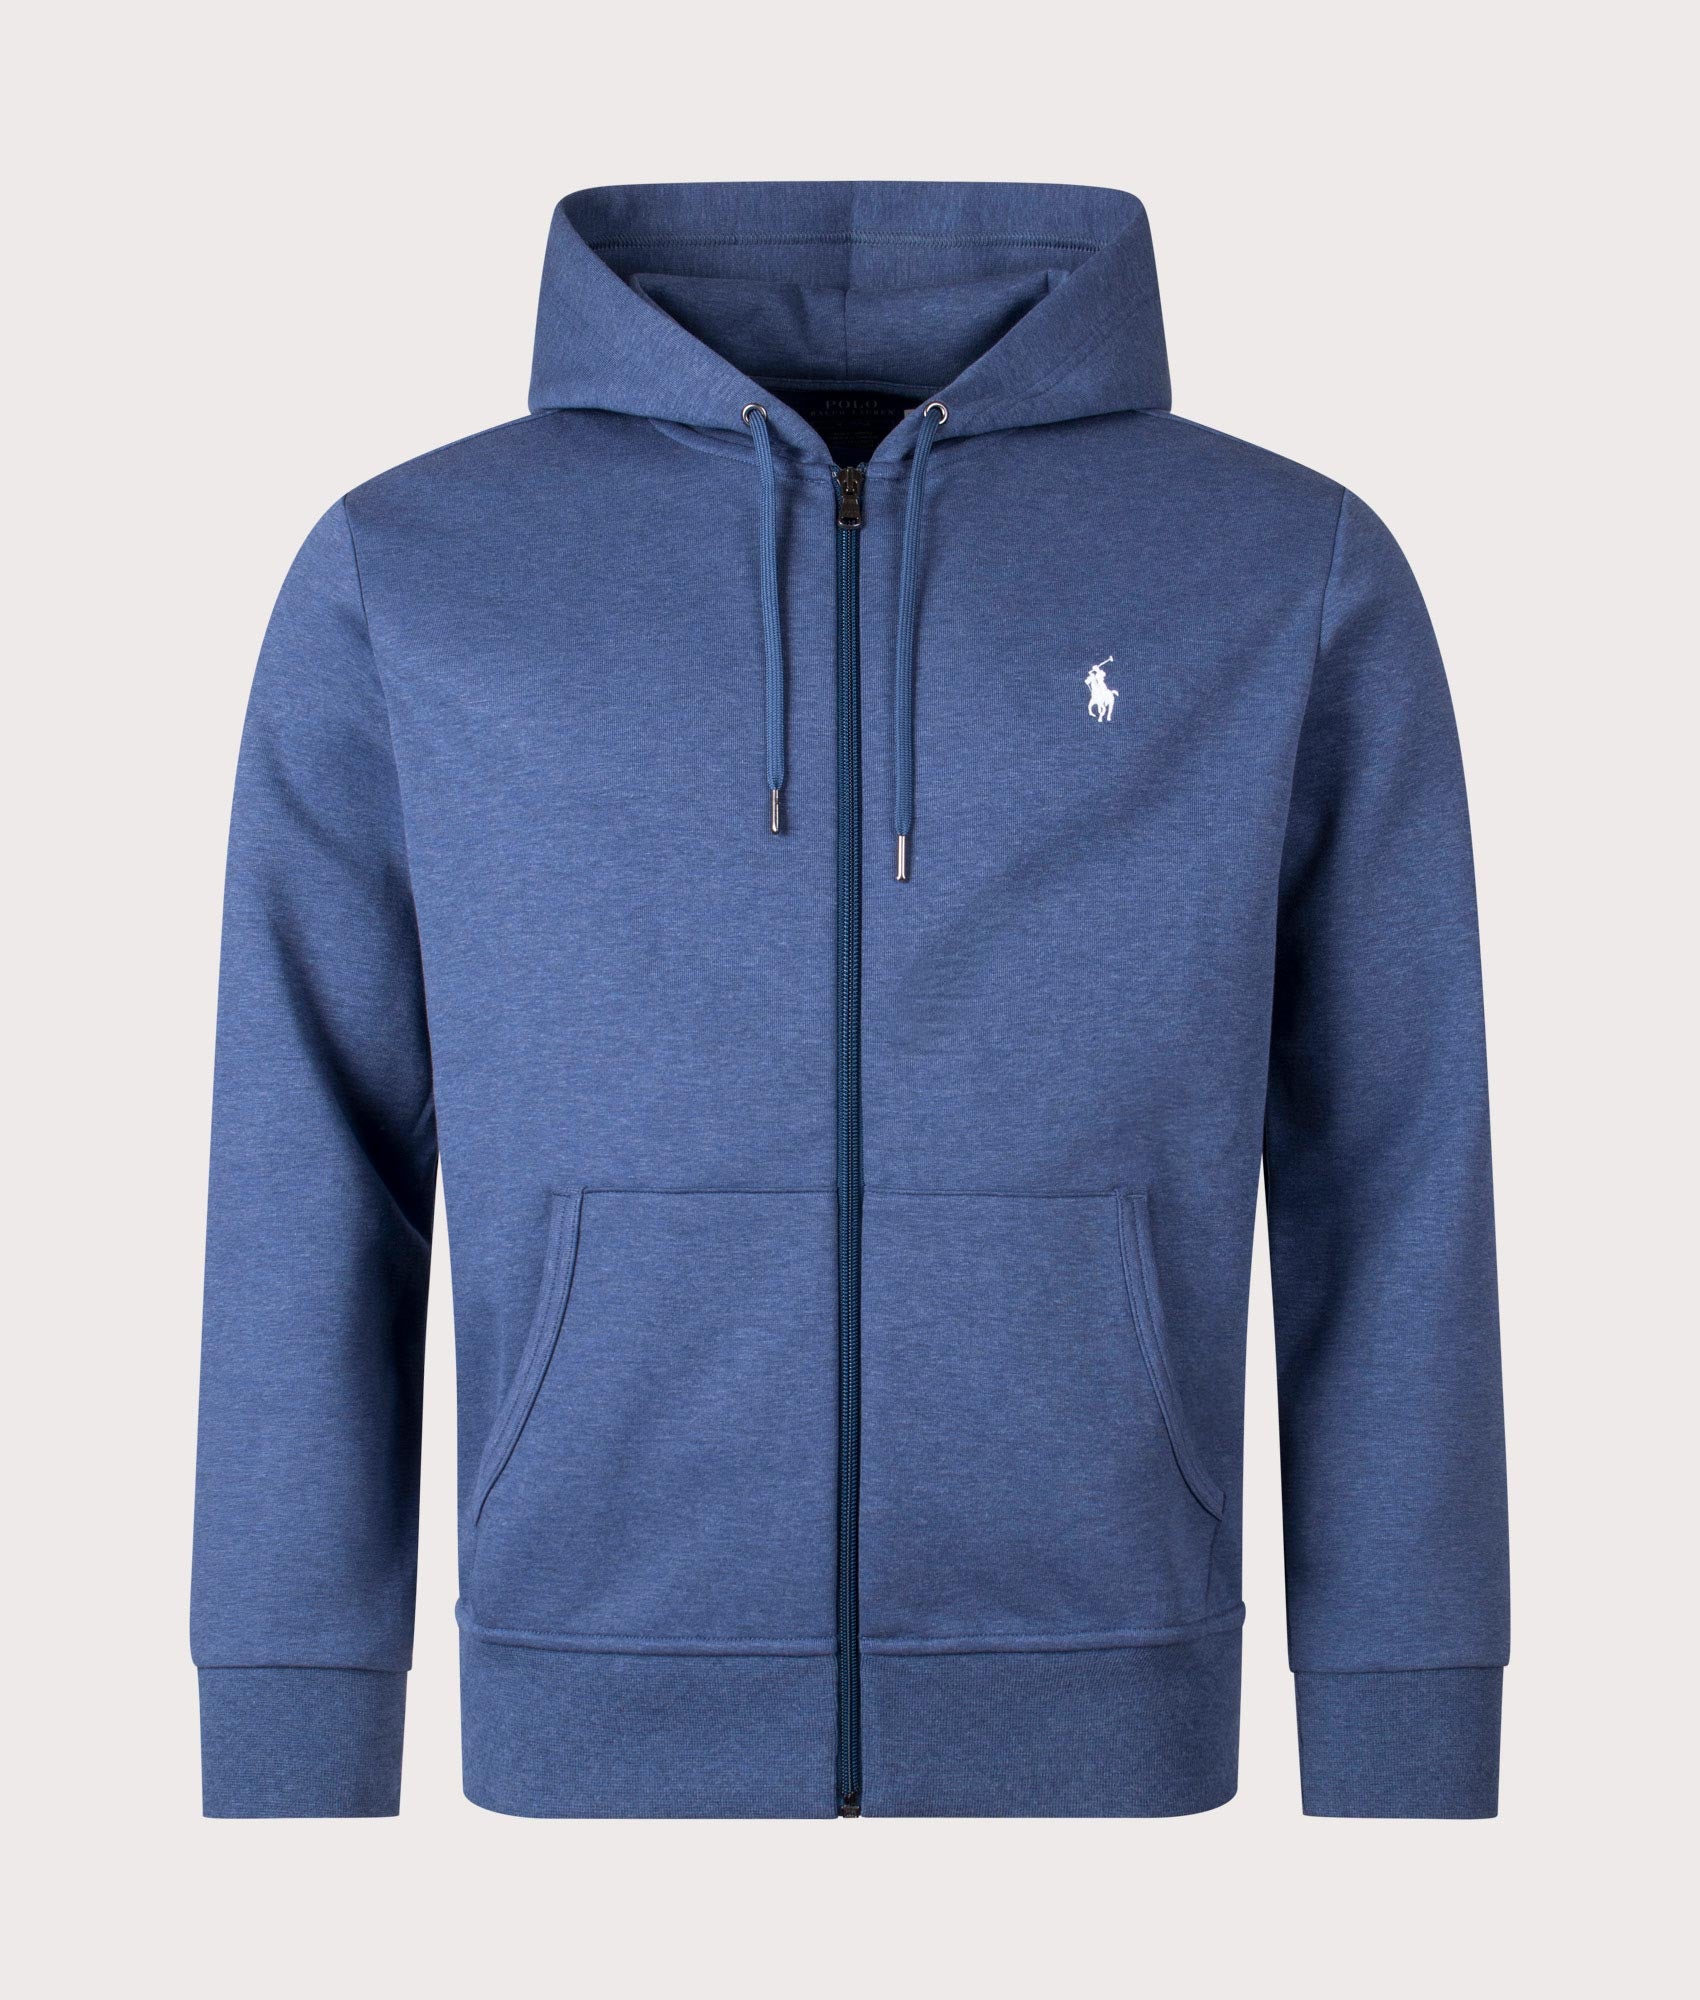 Double Knit Zip Up Hoodie Derby Blue Heather